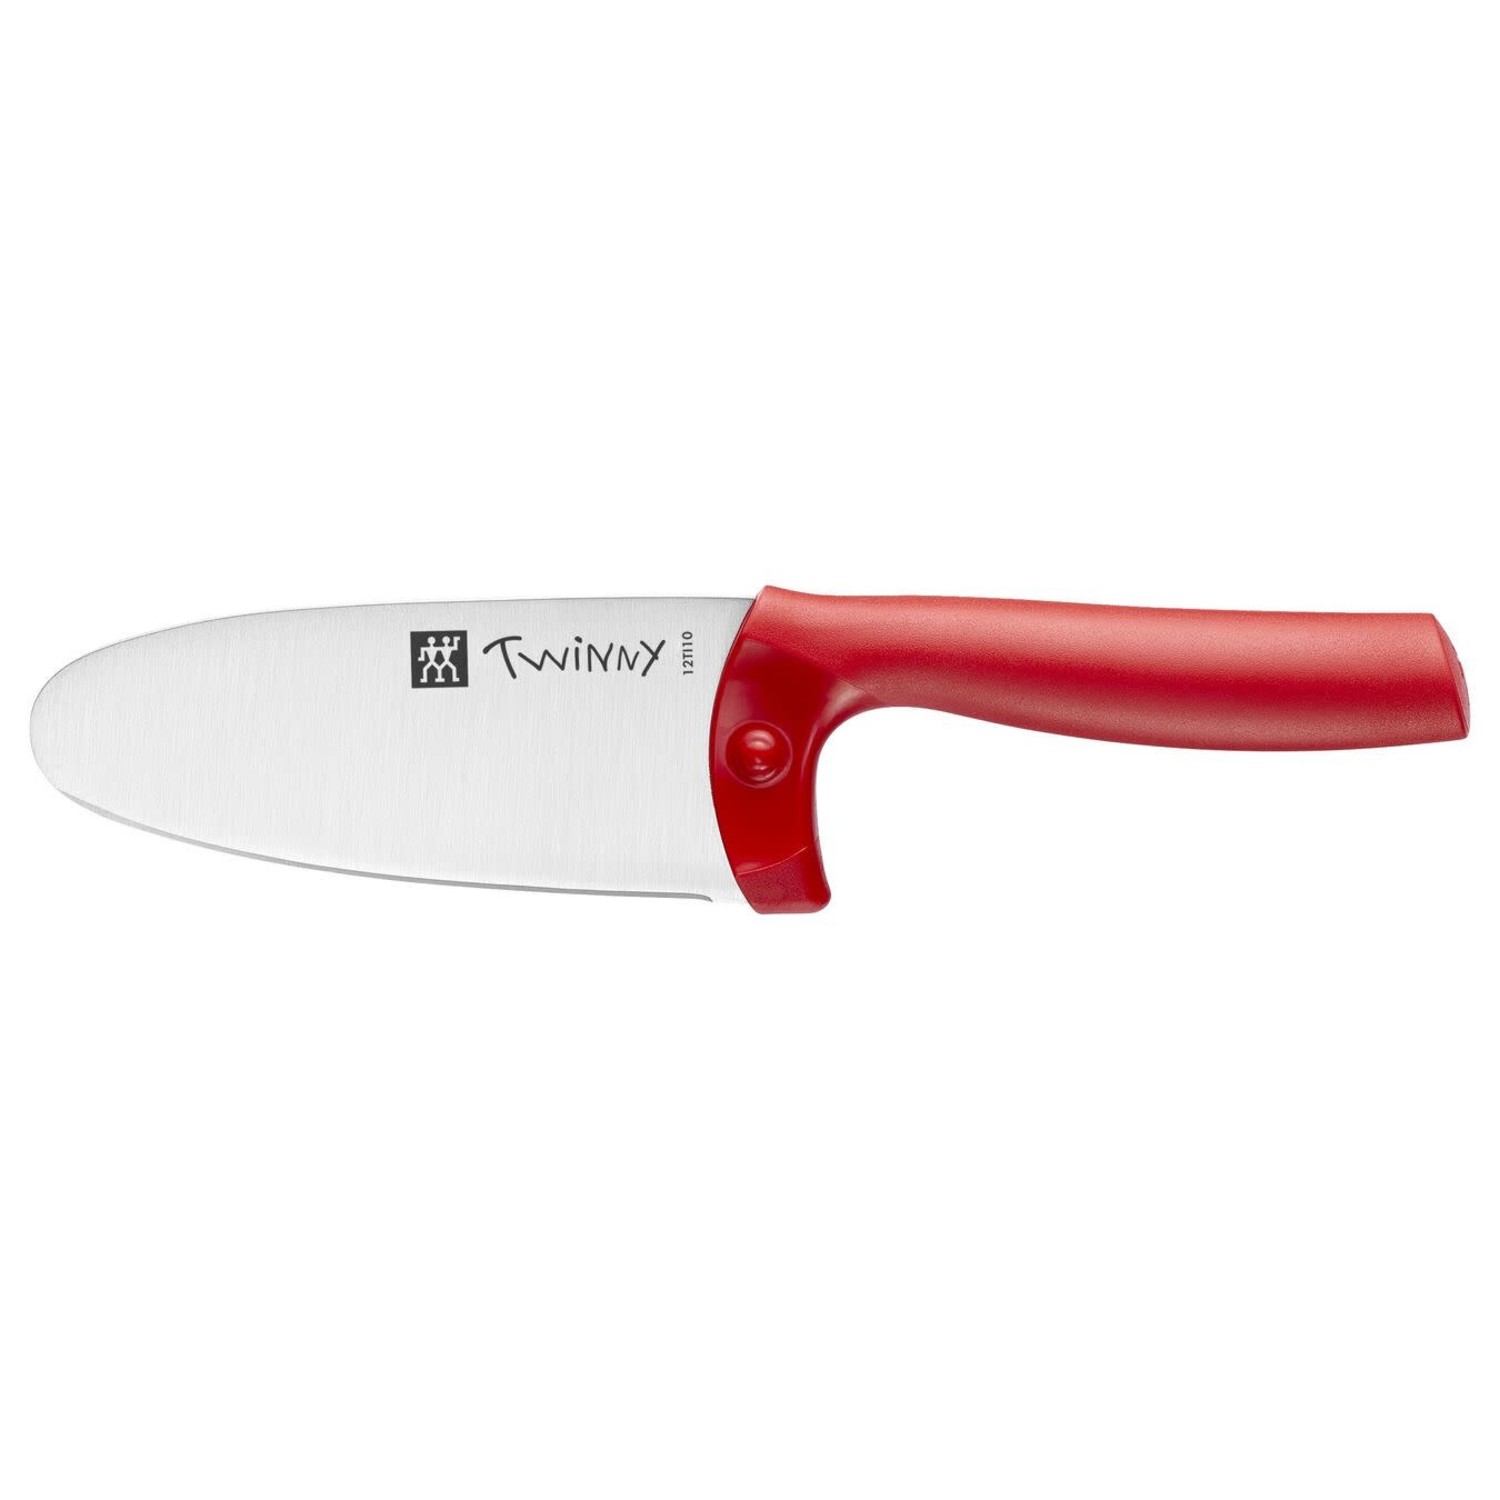 WSL kids chef's knife, red - Whisk